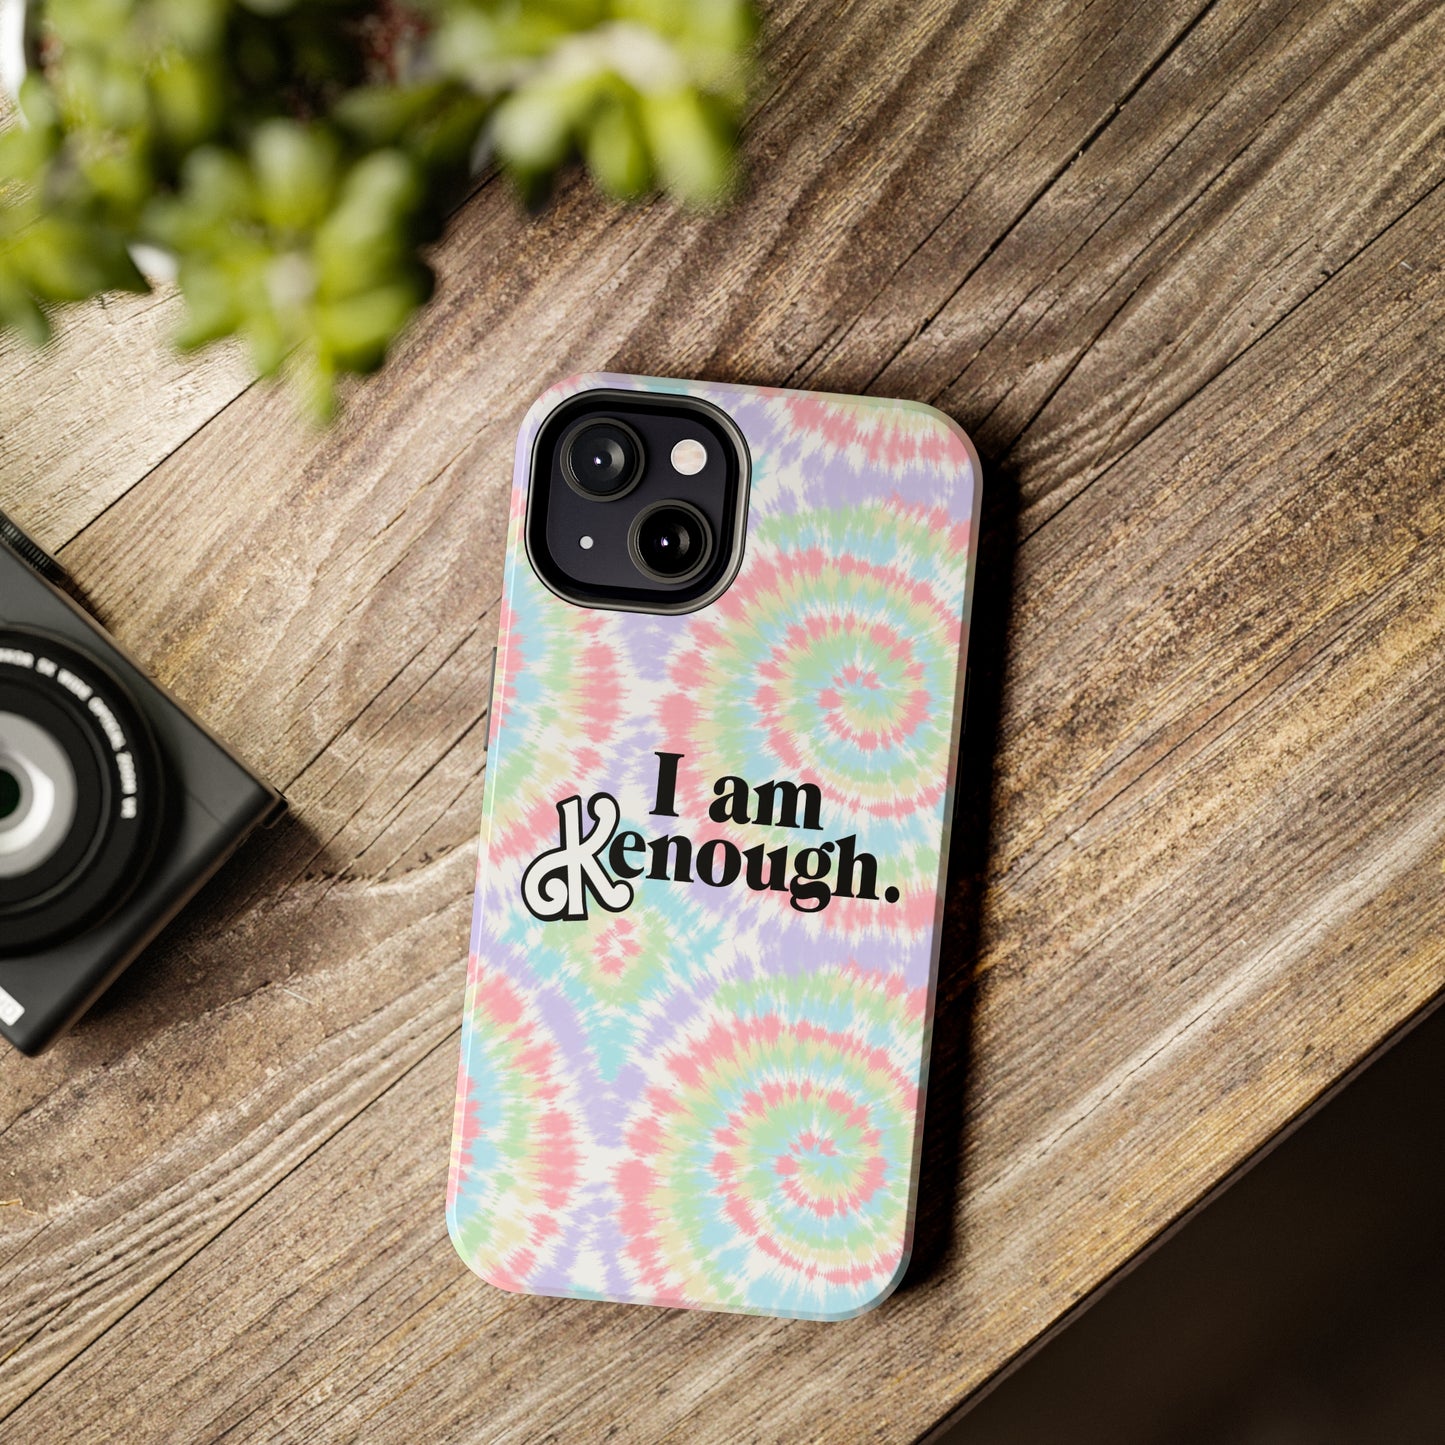 I am Kenough iPhone Case (iPhone 7, 8, X, 11, 12, 13, 14 & more)